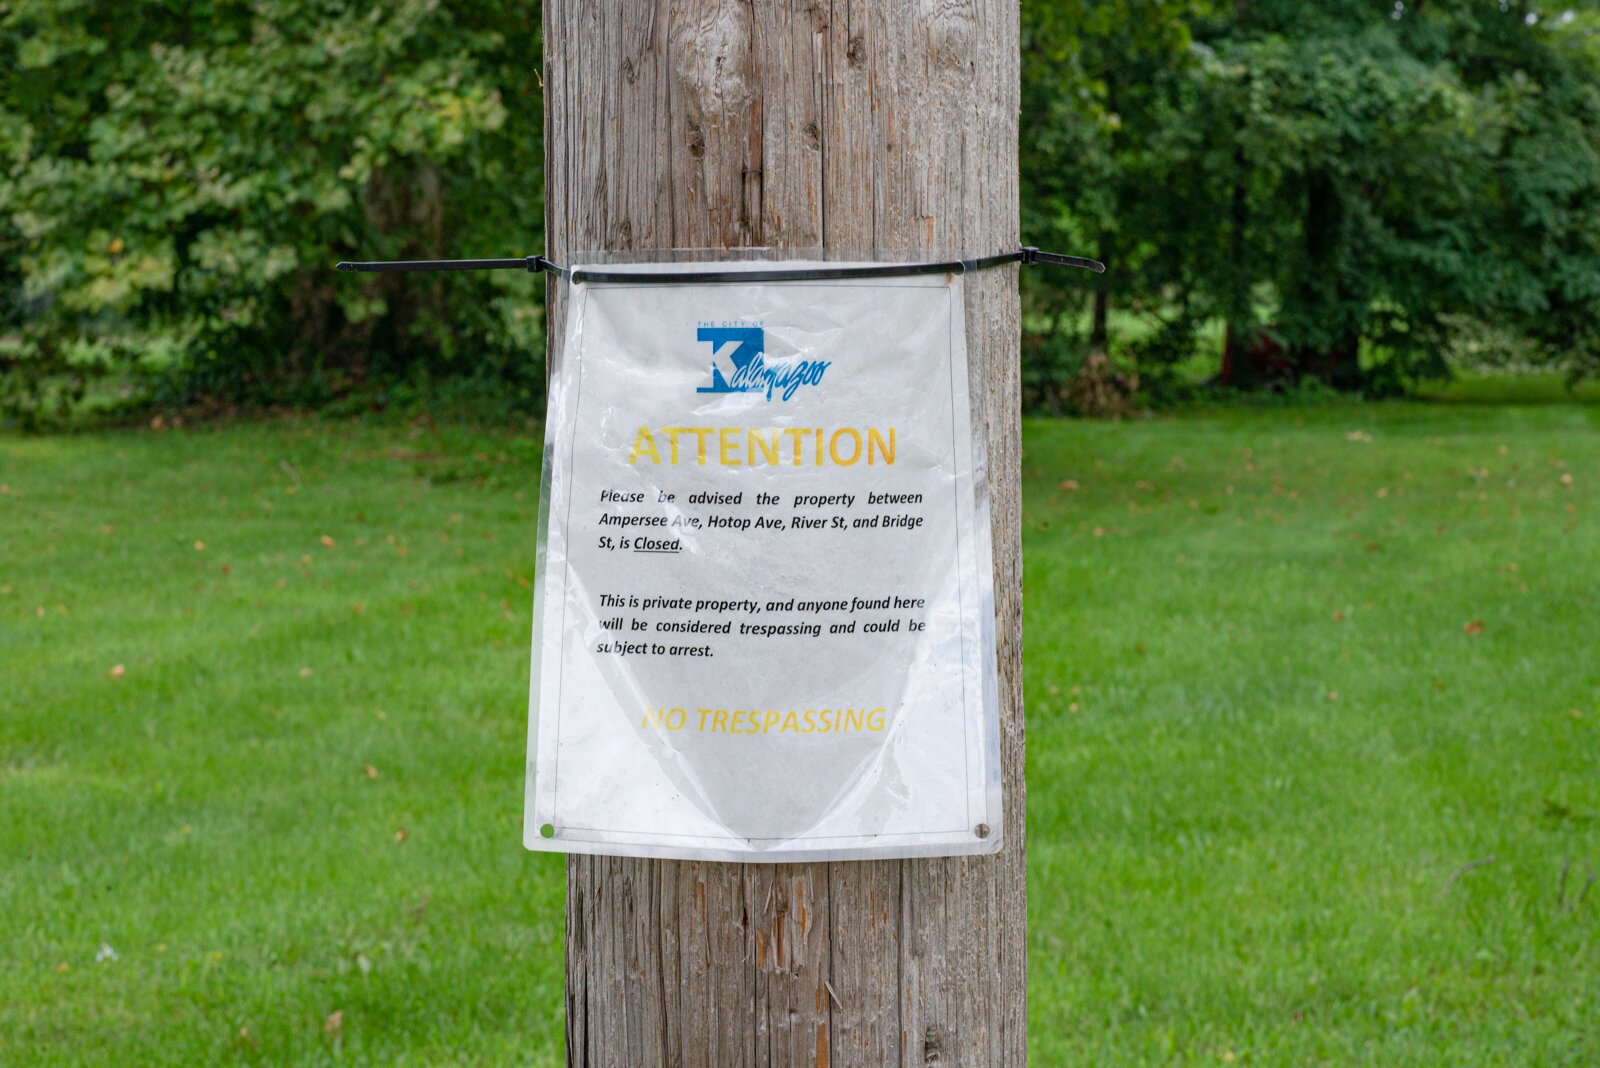 A sign on pole indicates the land is the property of The City of Kalamazoo. It is the site of a previous houseless people encampment from which residents were forcefully required to leave.